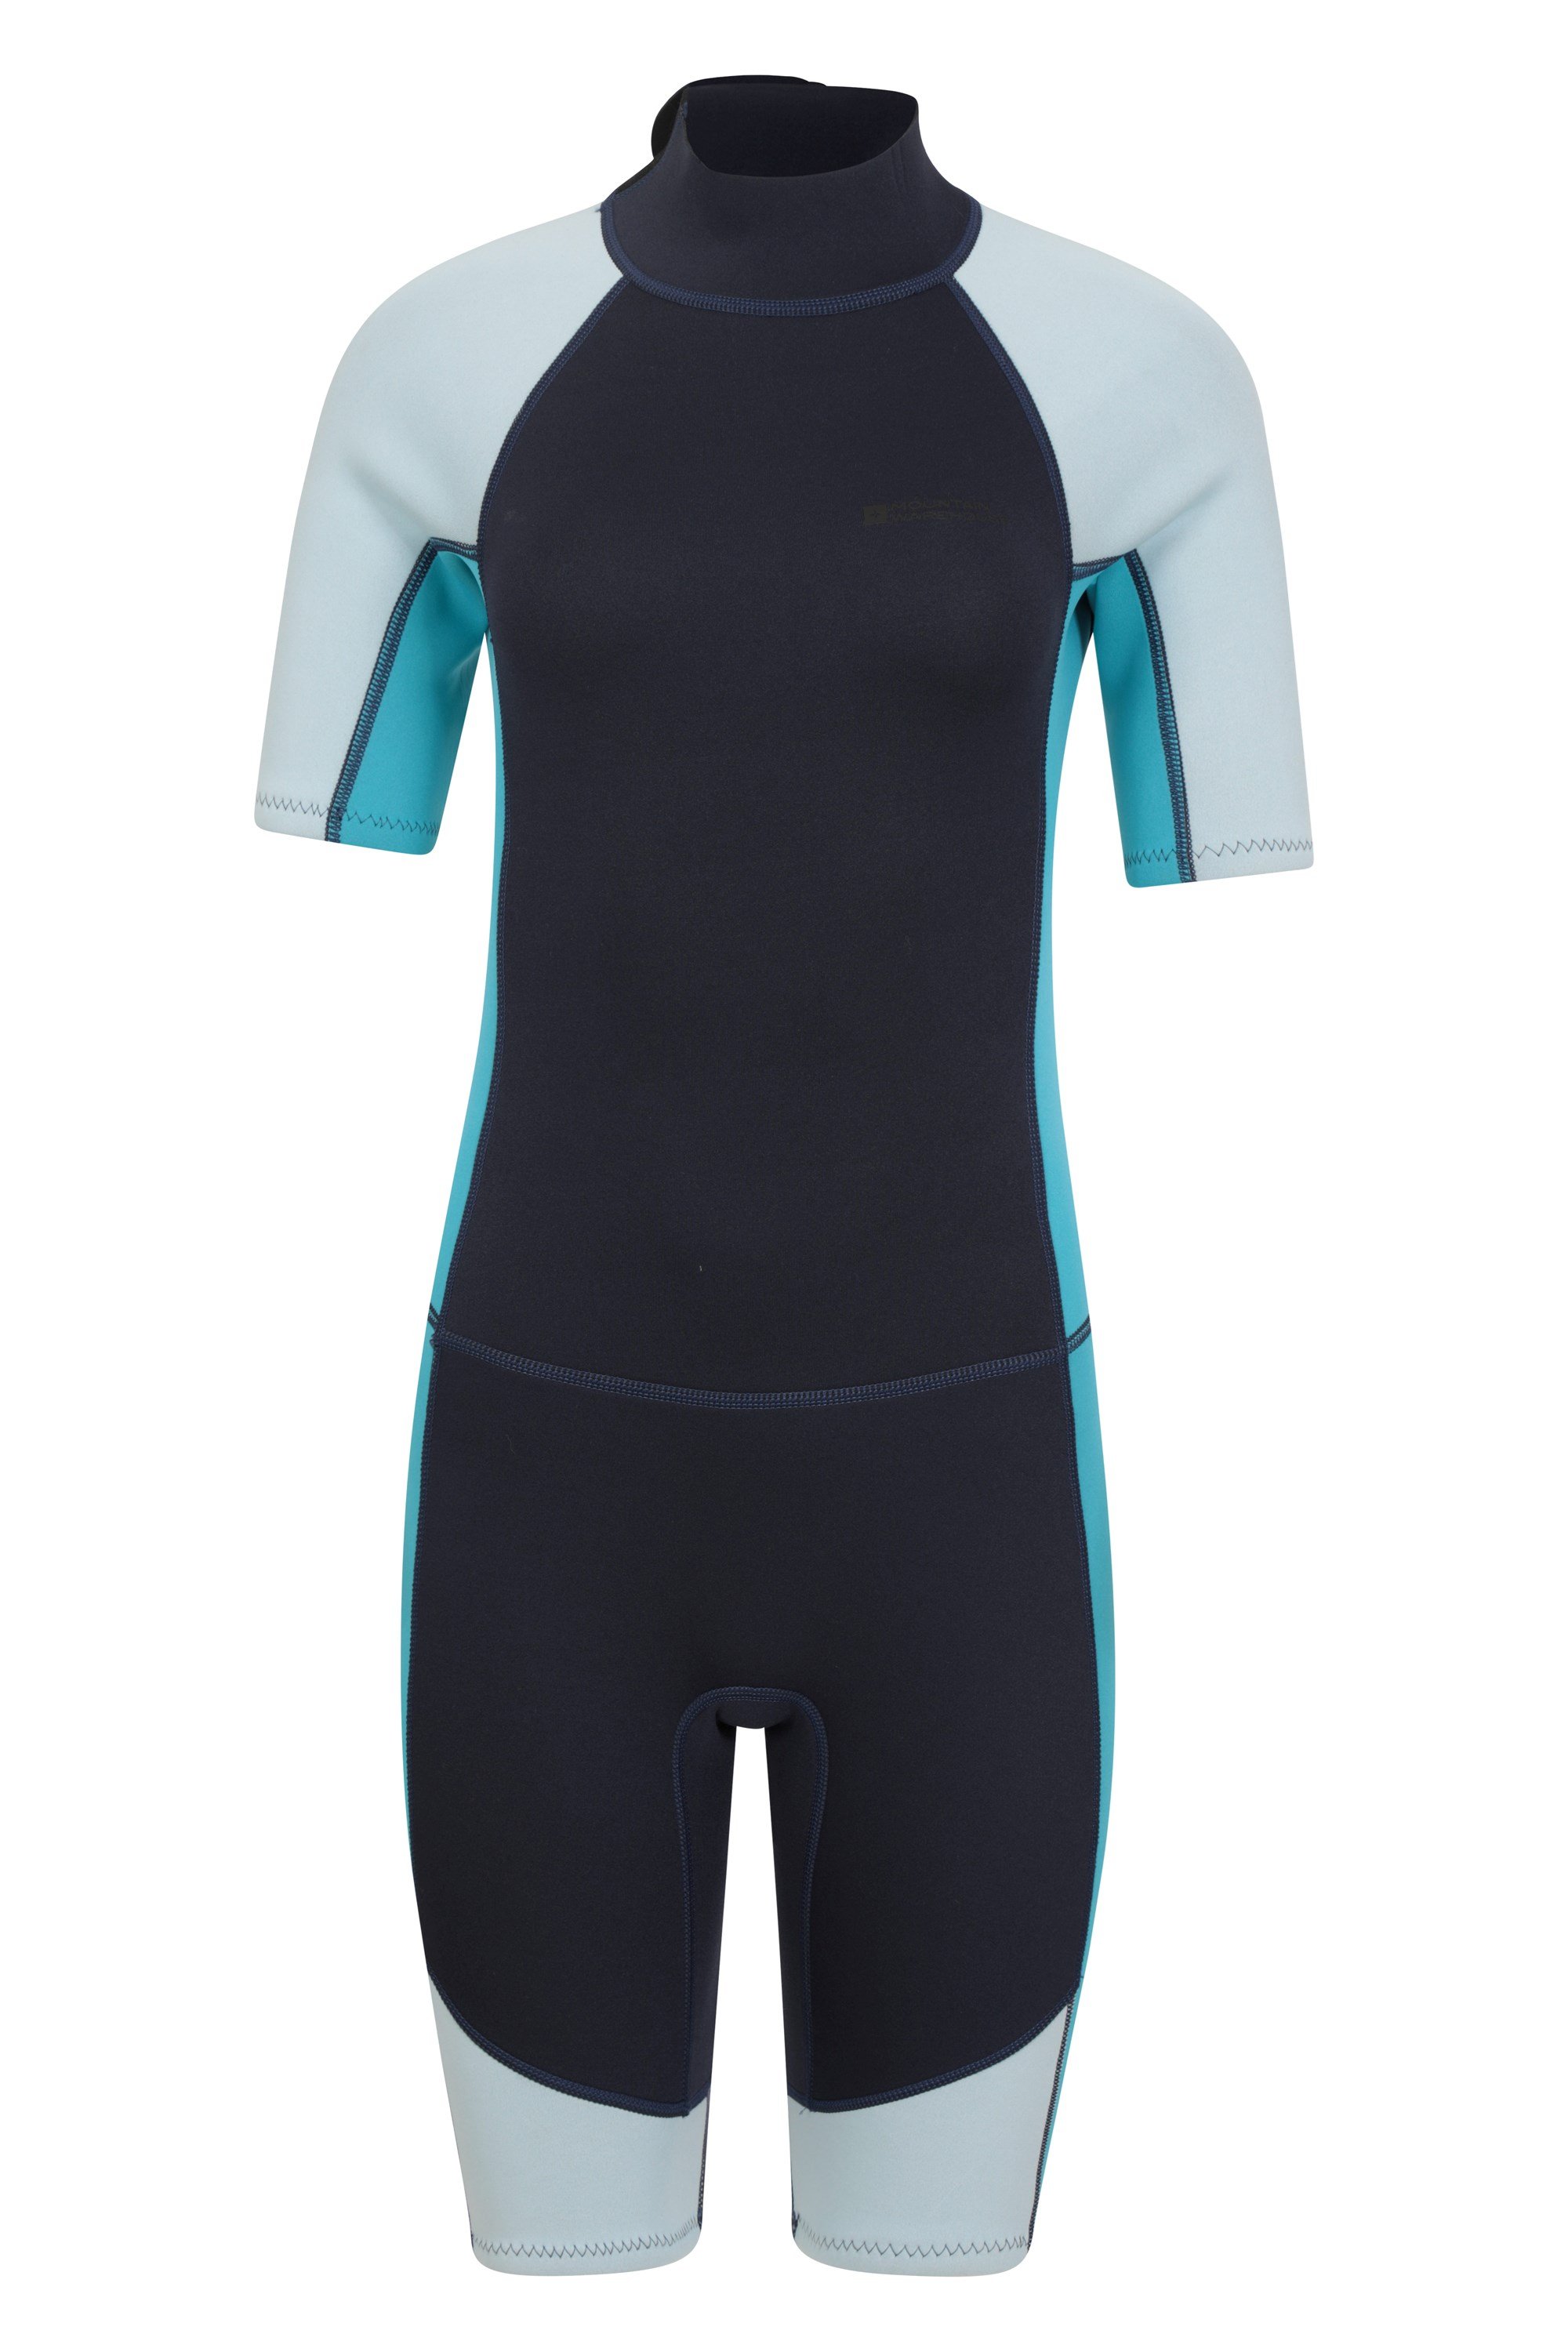 Shorty Womens 2. 5/2mm Wetsuit - Navy